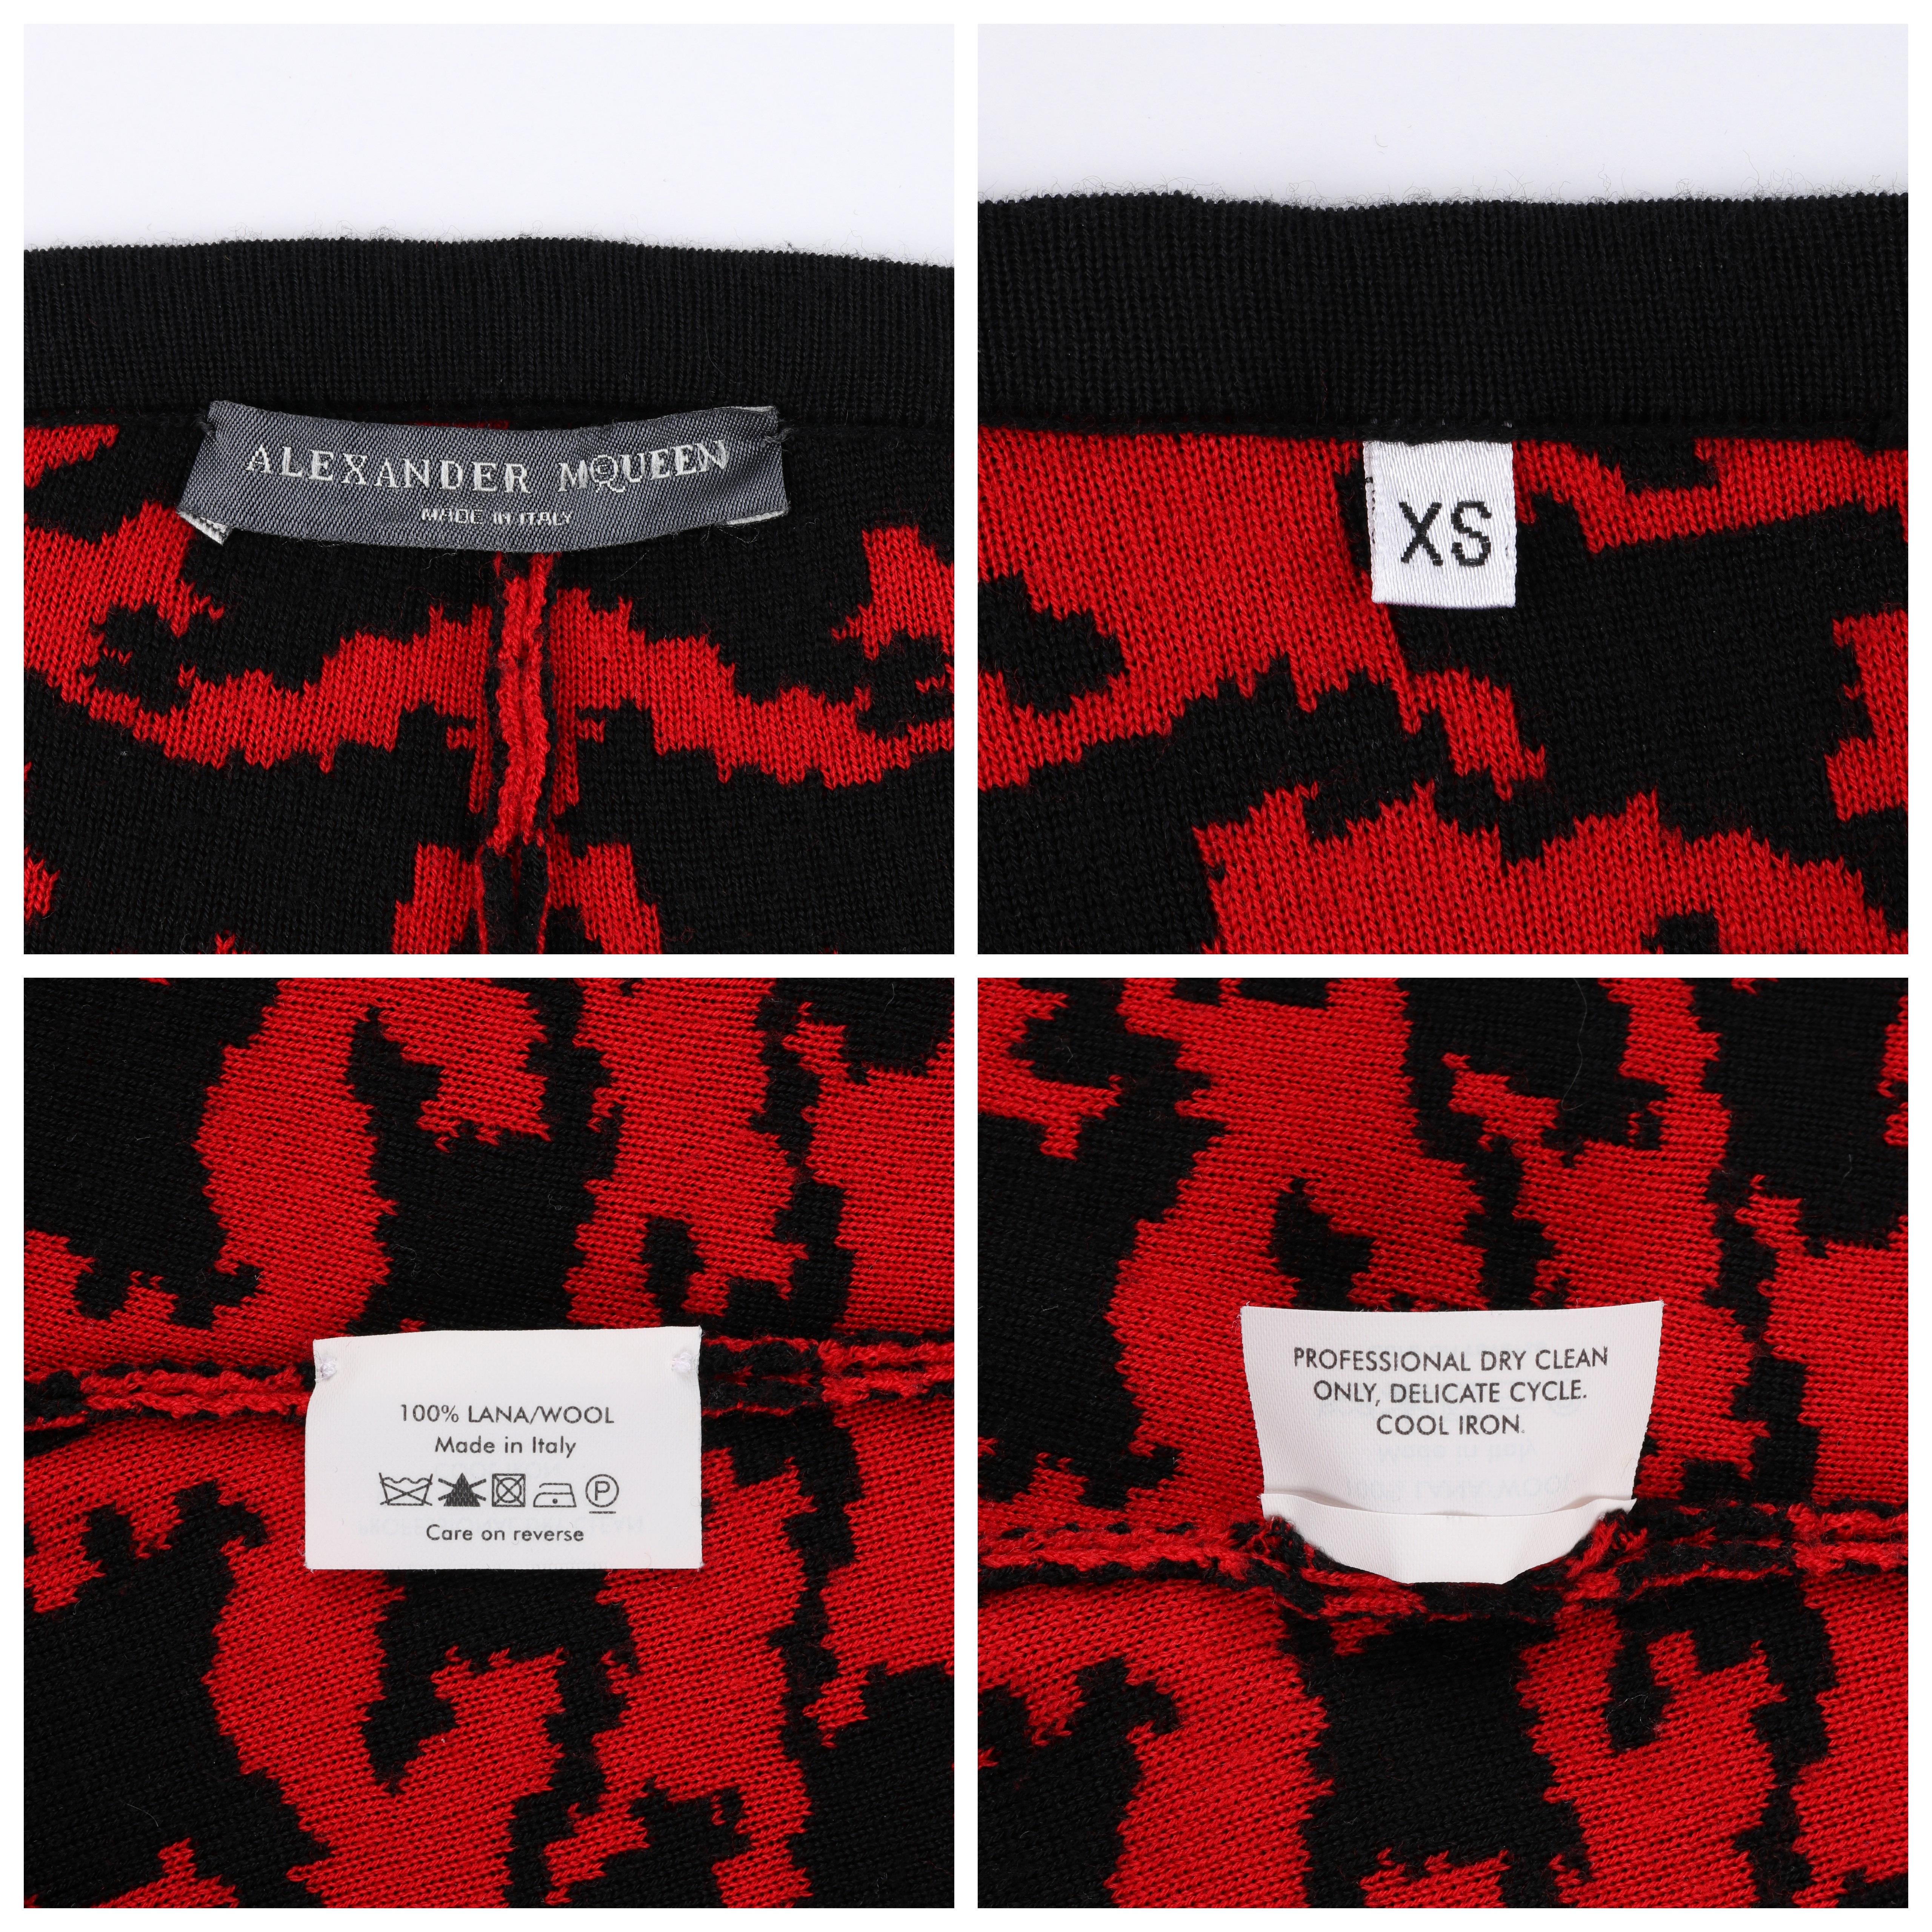 ALEXANDER McQUEEN A/W 2009 “The Horn Of Plenty” Red Houndstooth Knit Leggings XS For Sale 1